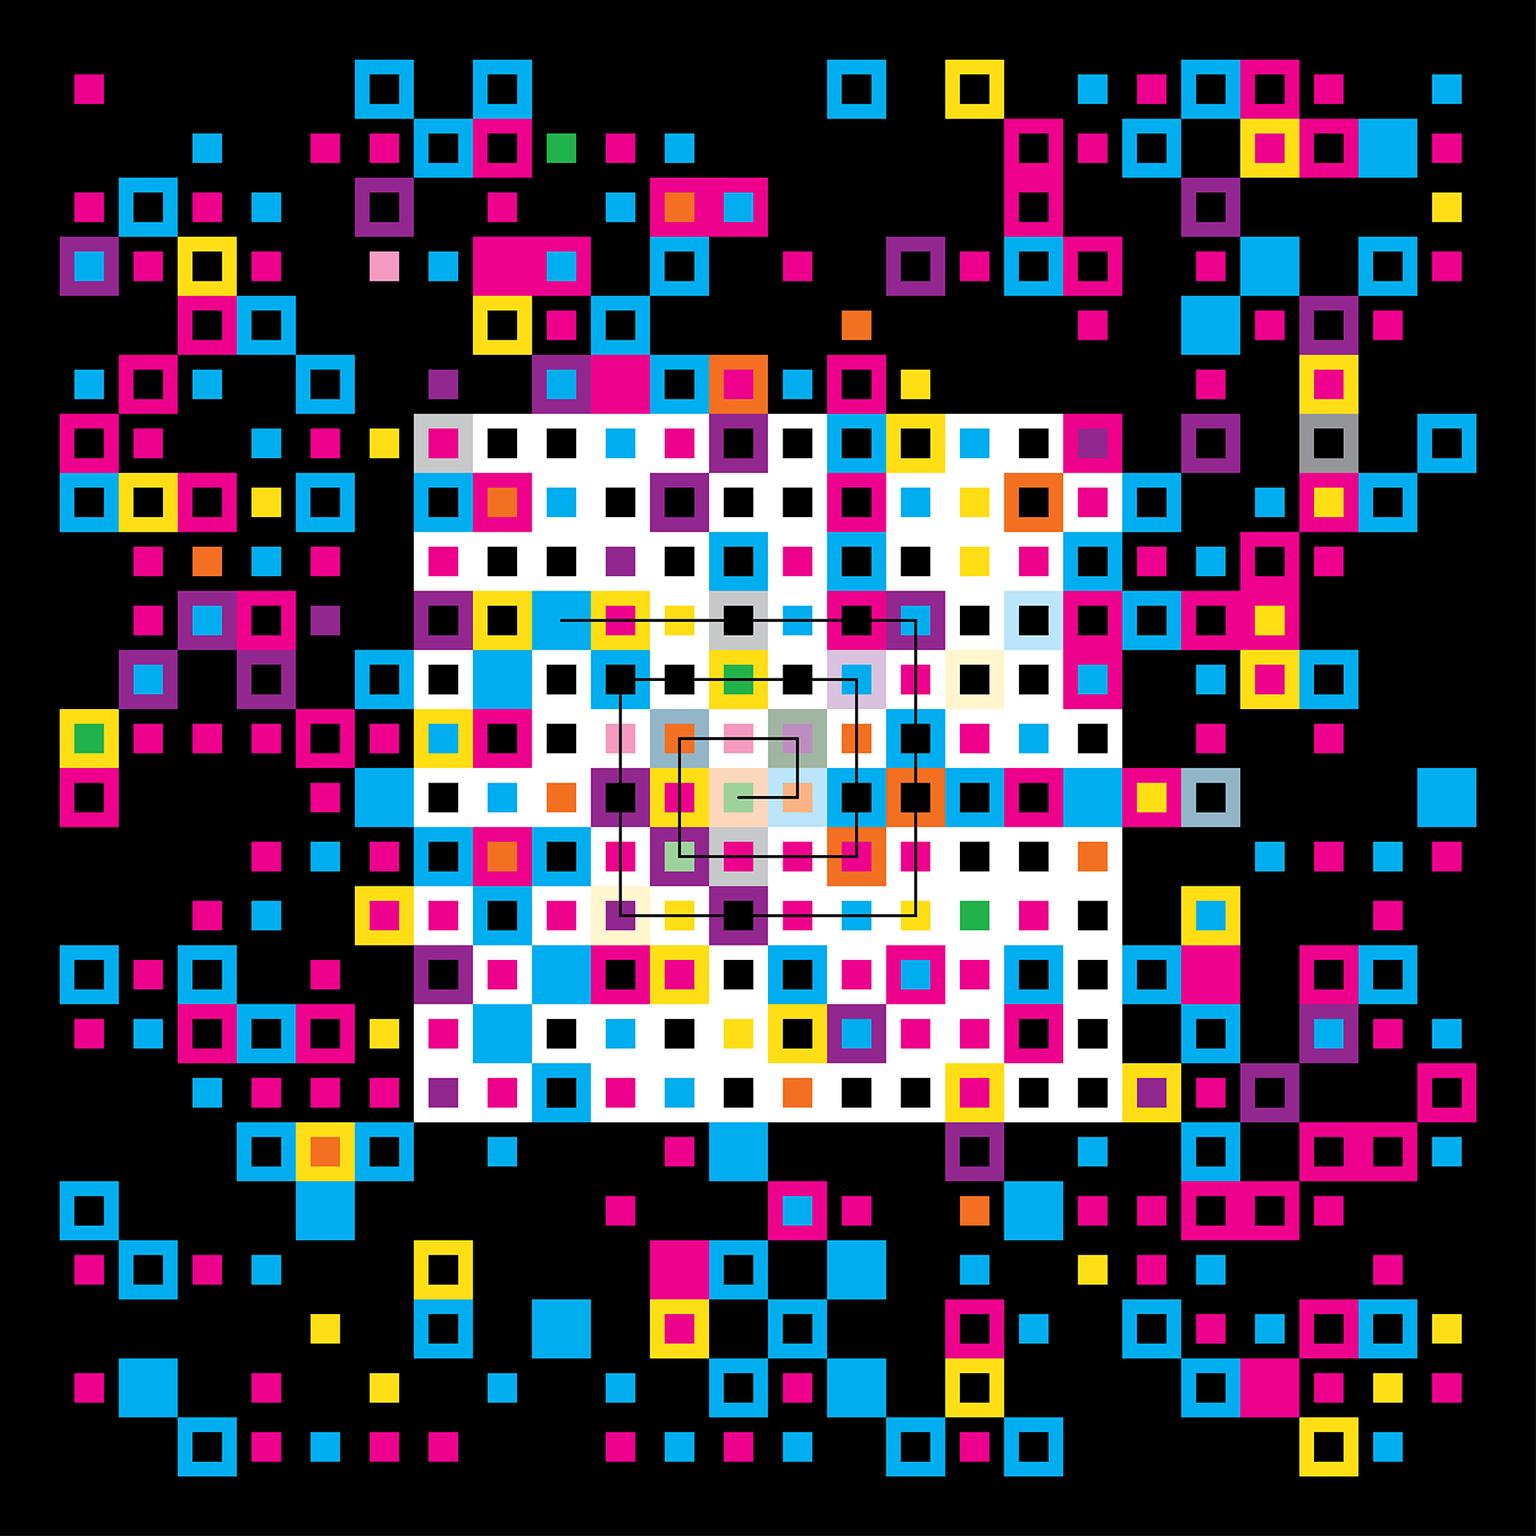 Image for entry 'Sequences on a Square Grid - 576'